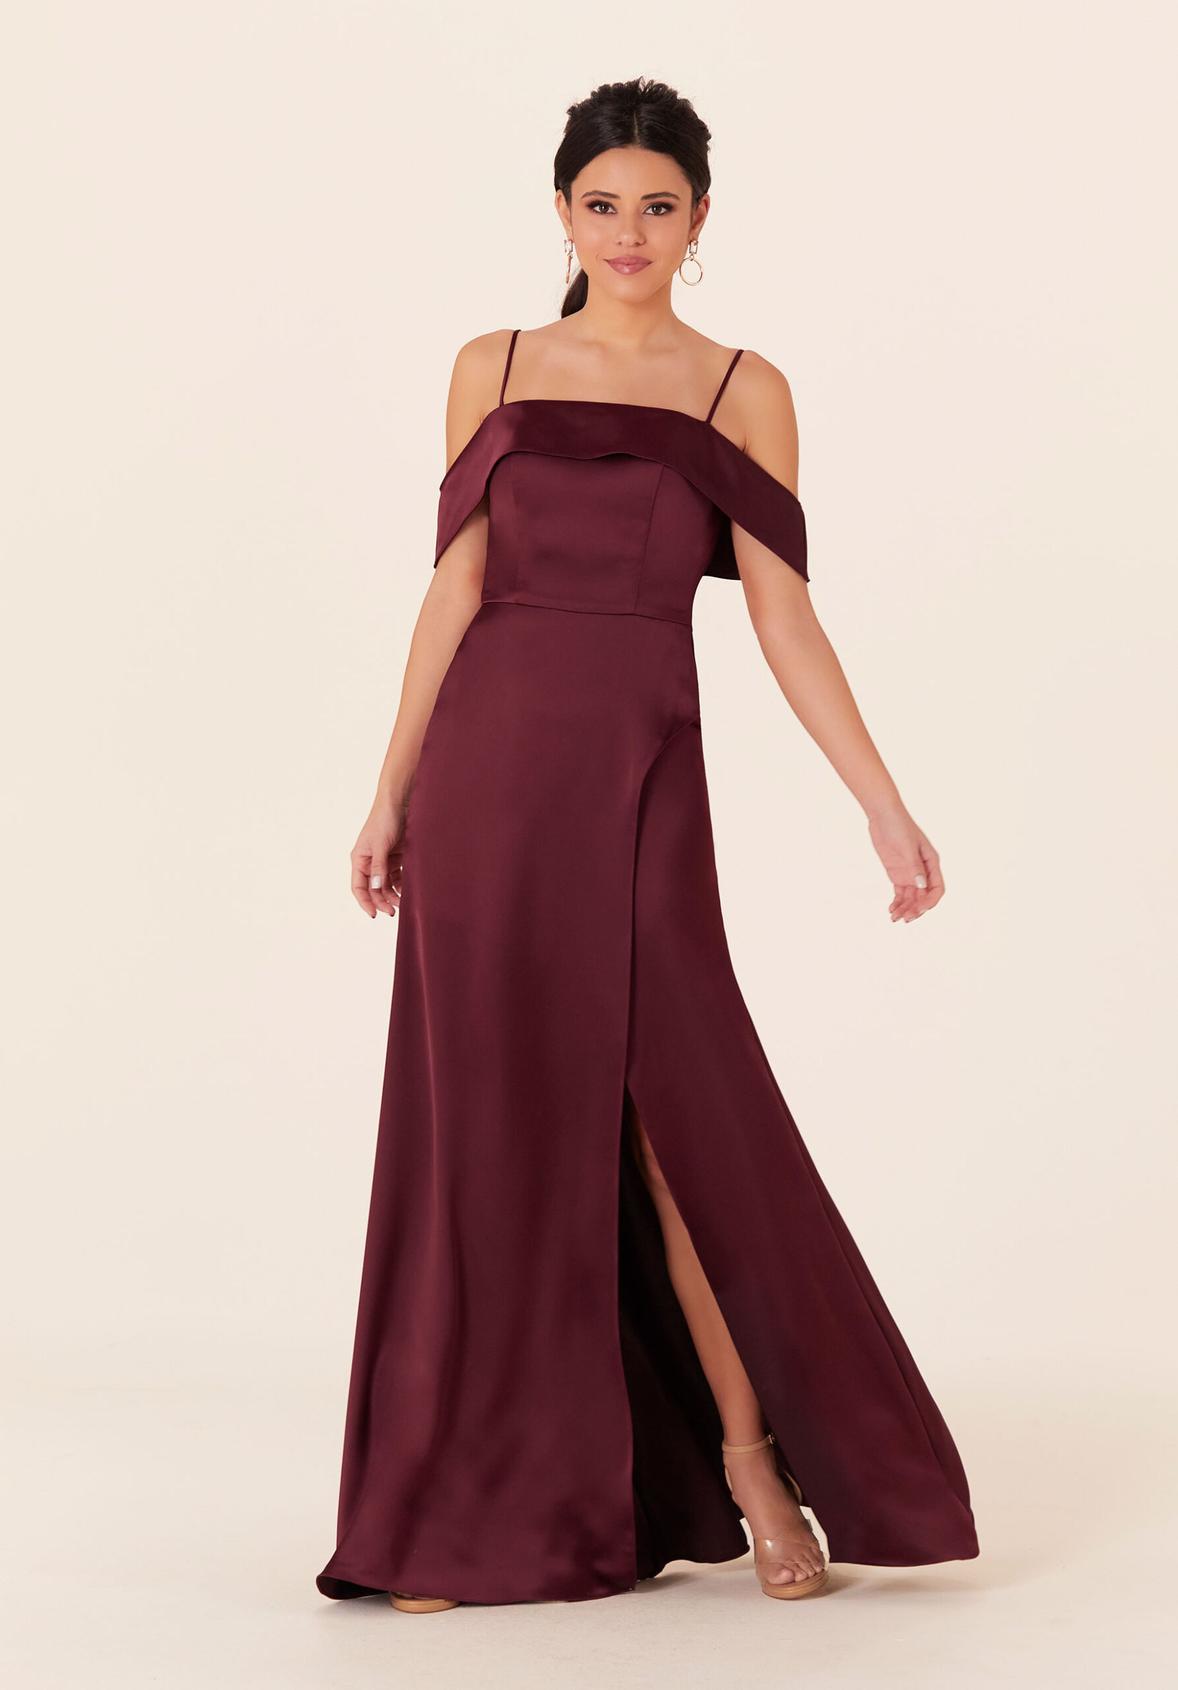 Luxe Satin Bridesmaid Dress with Cuffed Neckline offers in Morilee